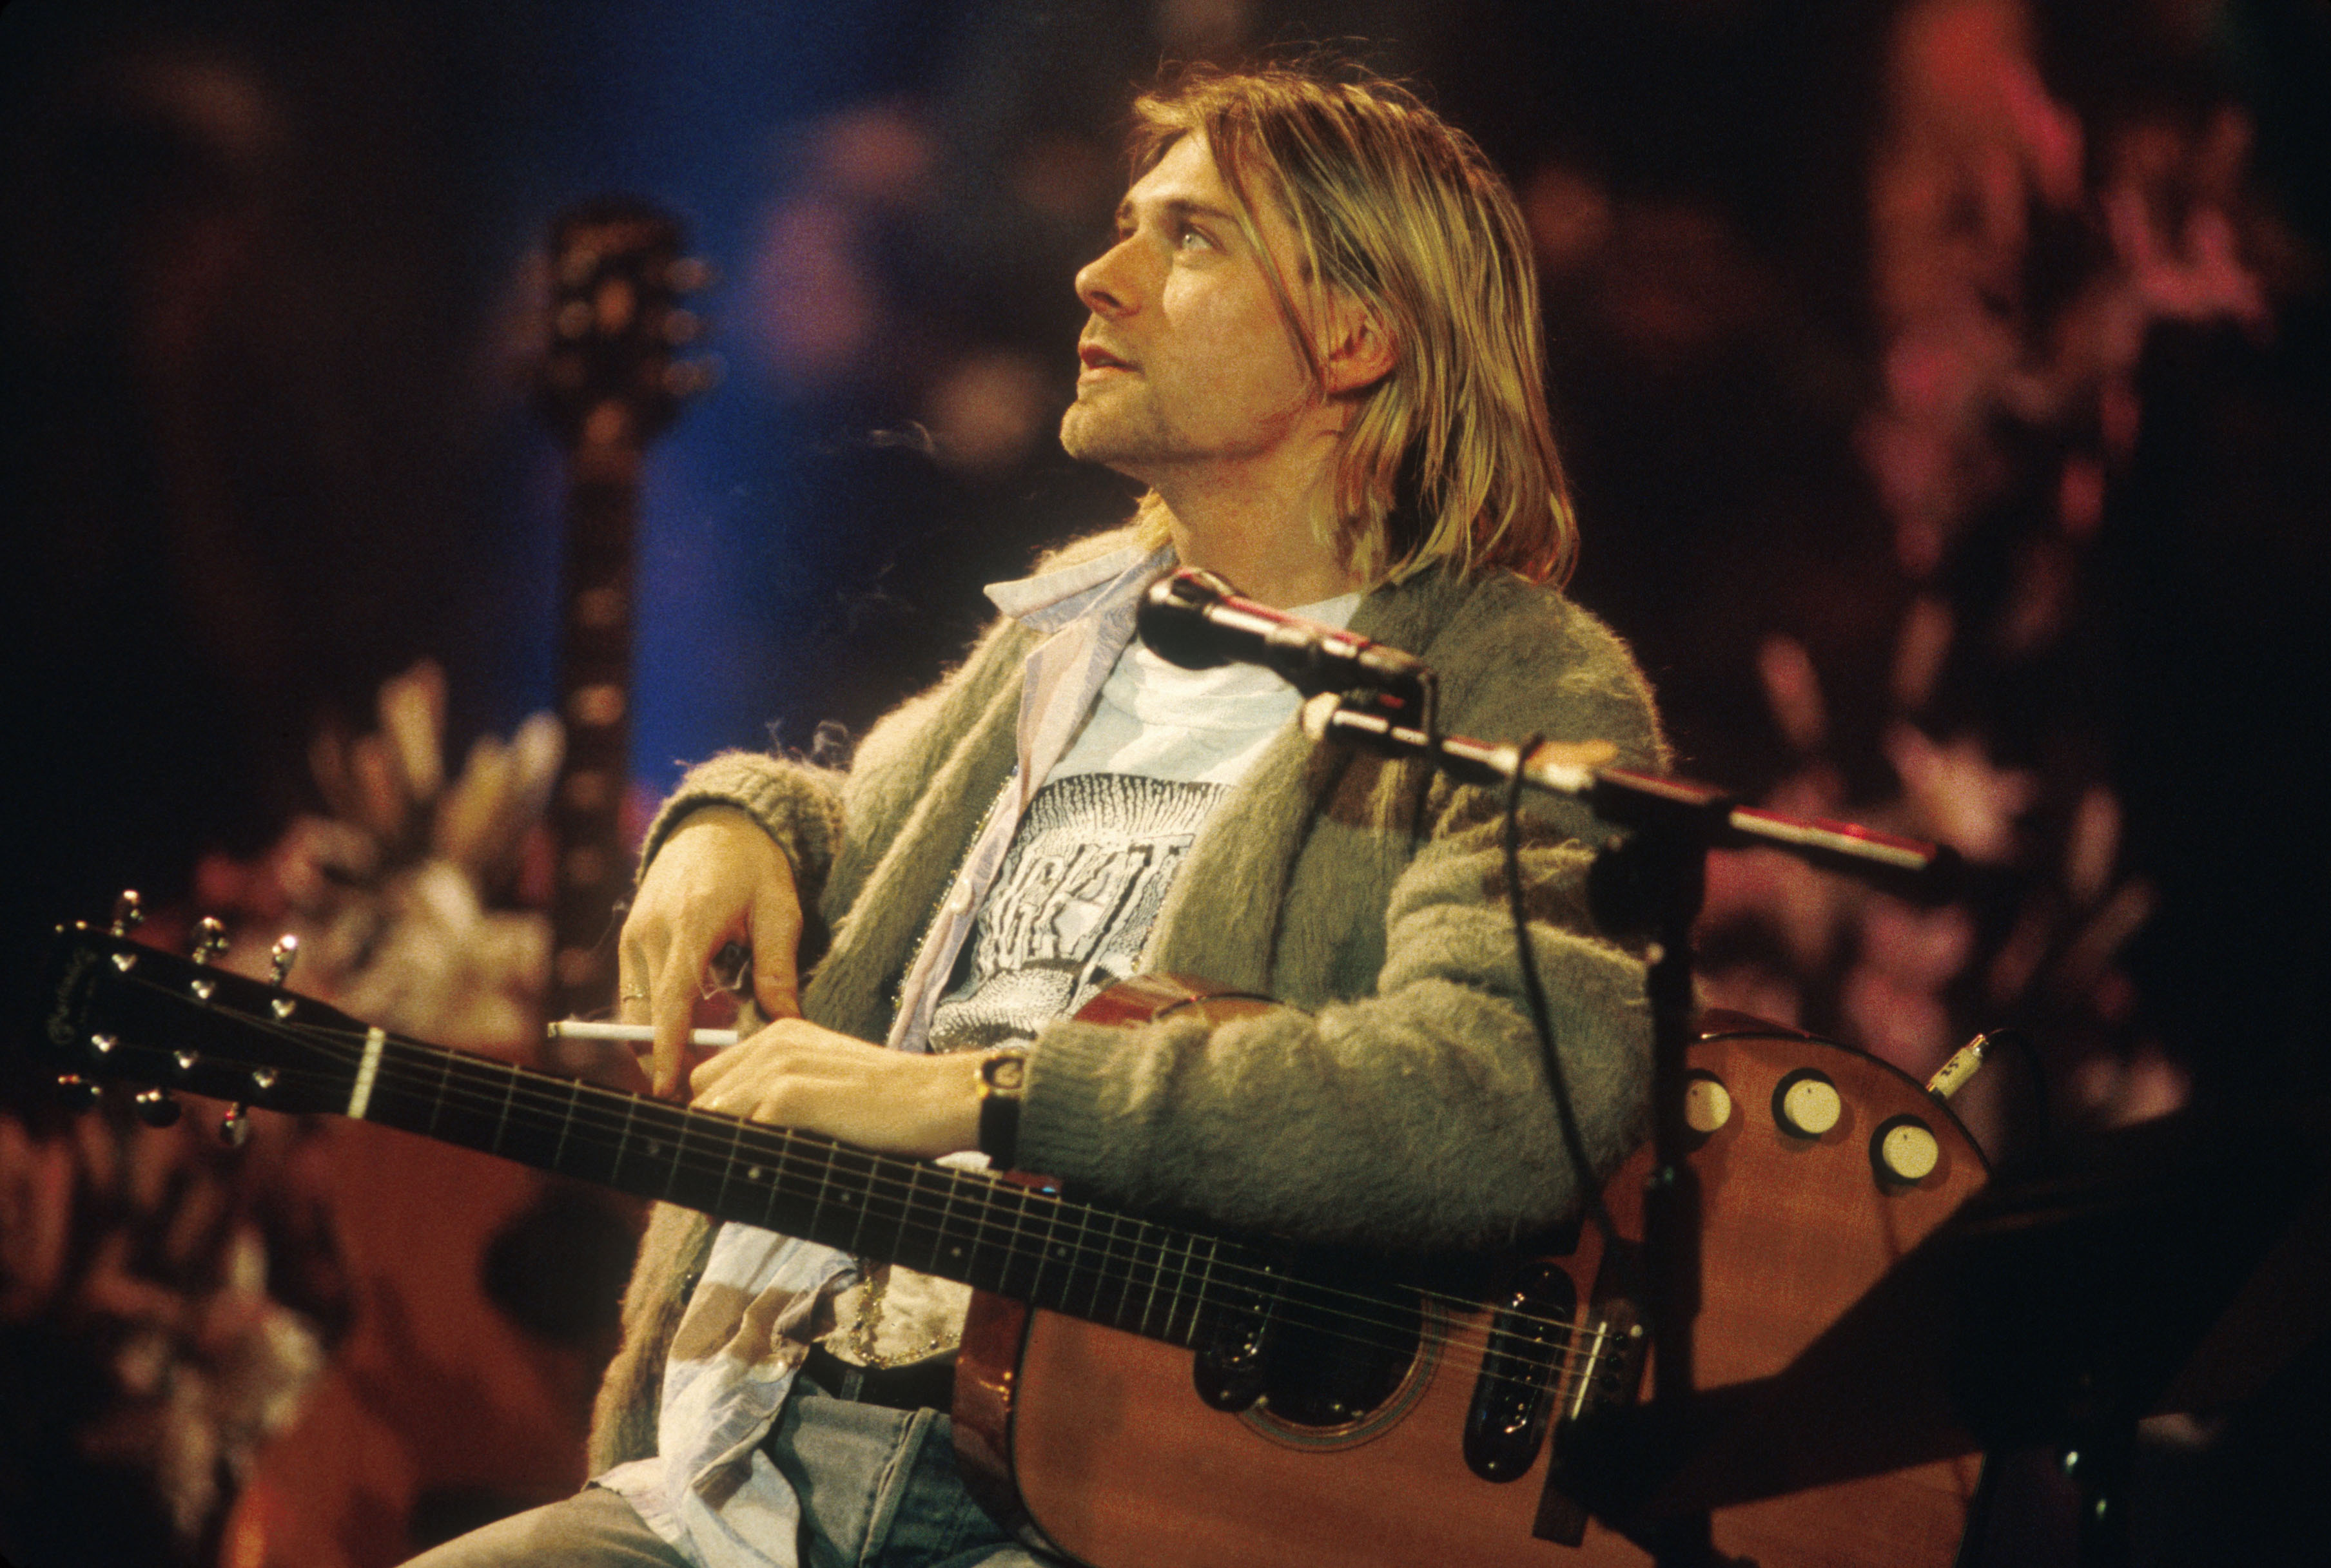 Kurt Cobain of Nirvana during the taping of <i>MTV Unplugged</i> at Sony Studios in New York City on Nov. 18, 1993 (Frank Micelotta—Getty Images)